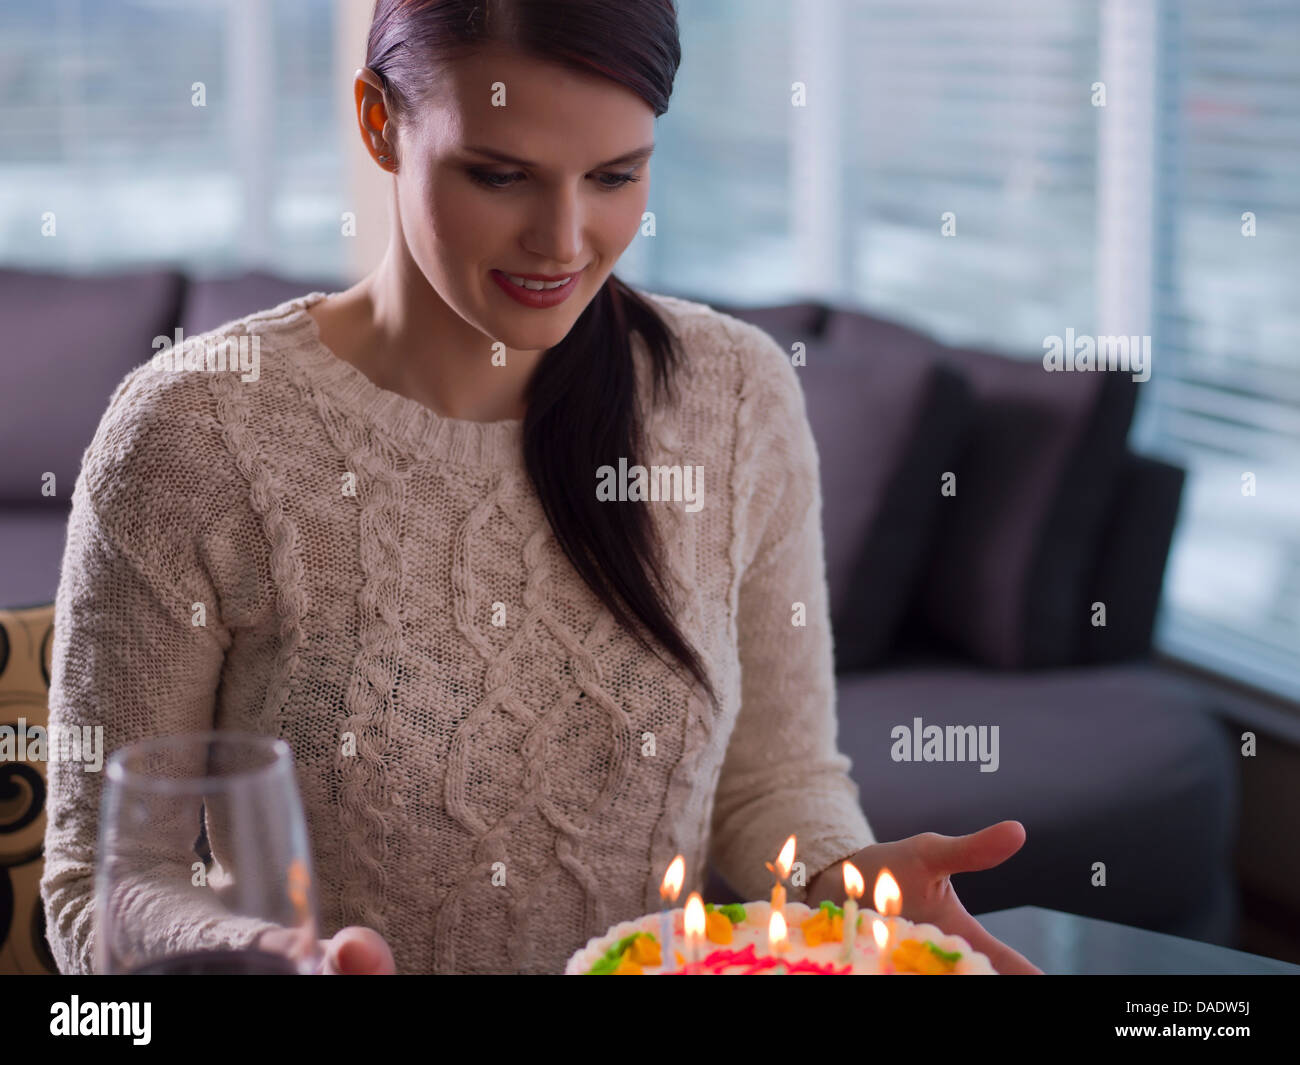 Young woman looking at birthday cake Stock Photo